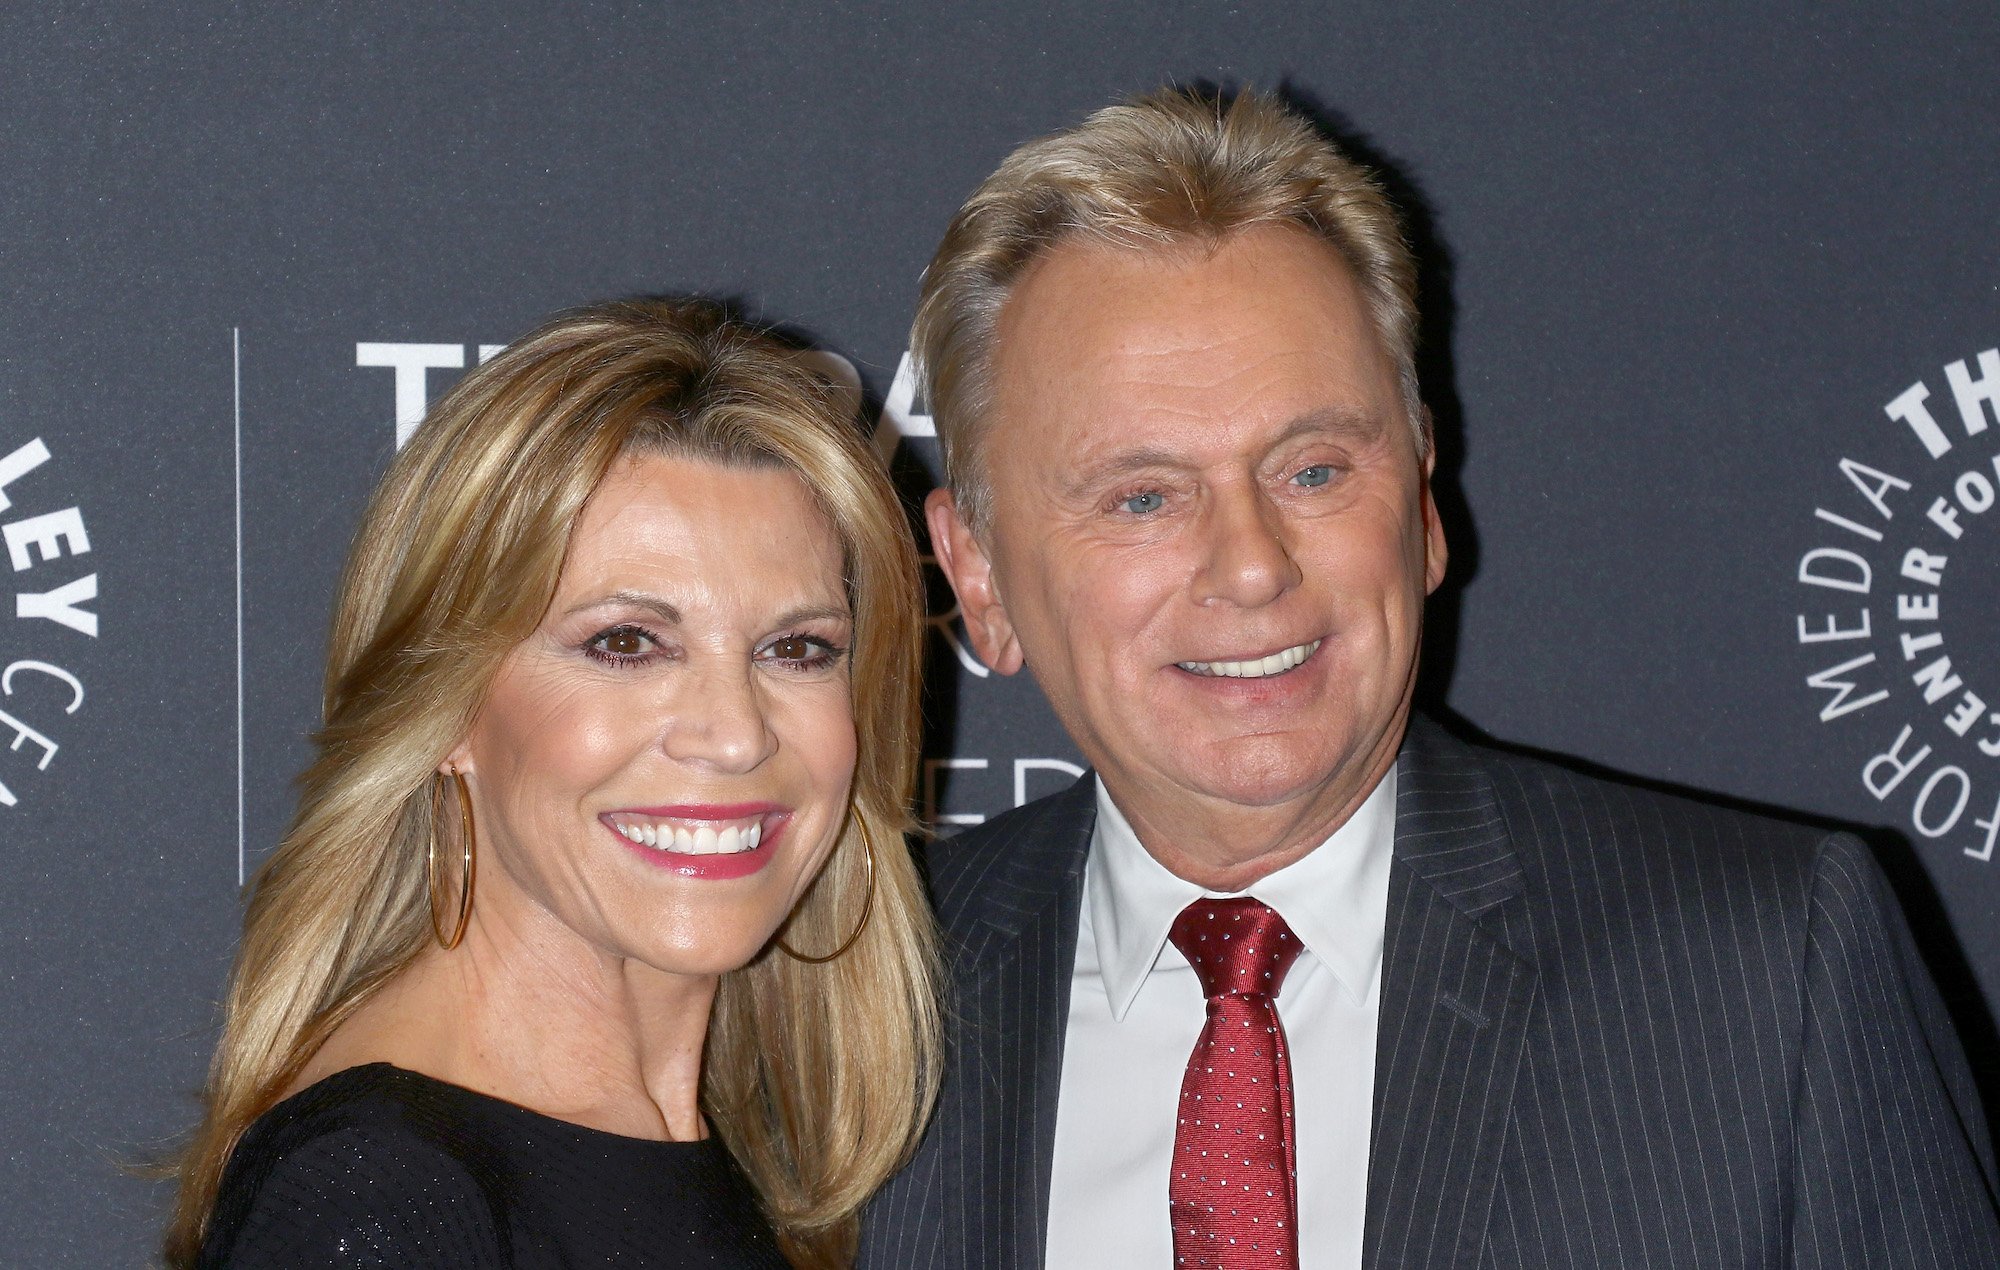 Vanna White and Pat Sajak smiling in front of a gray background